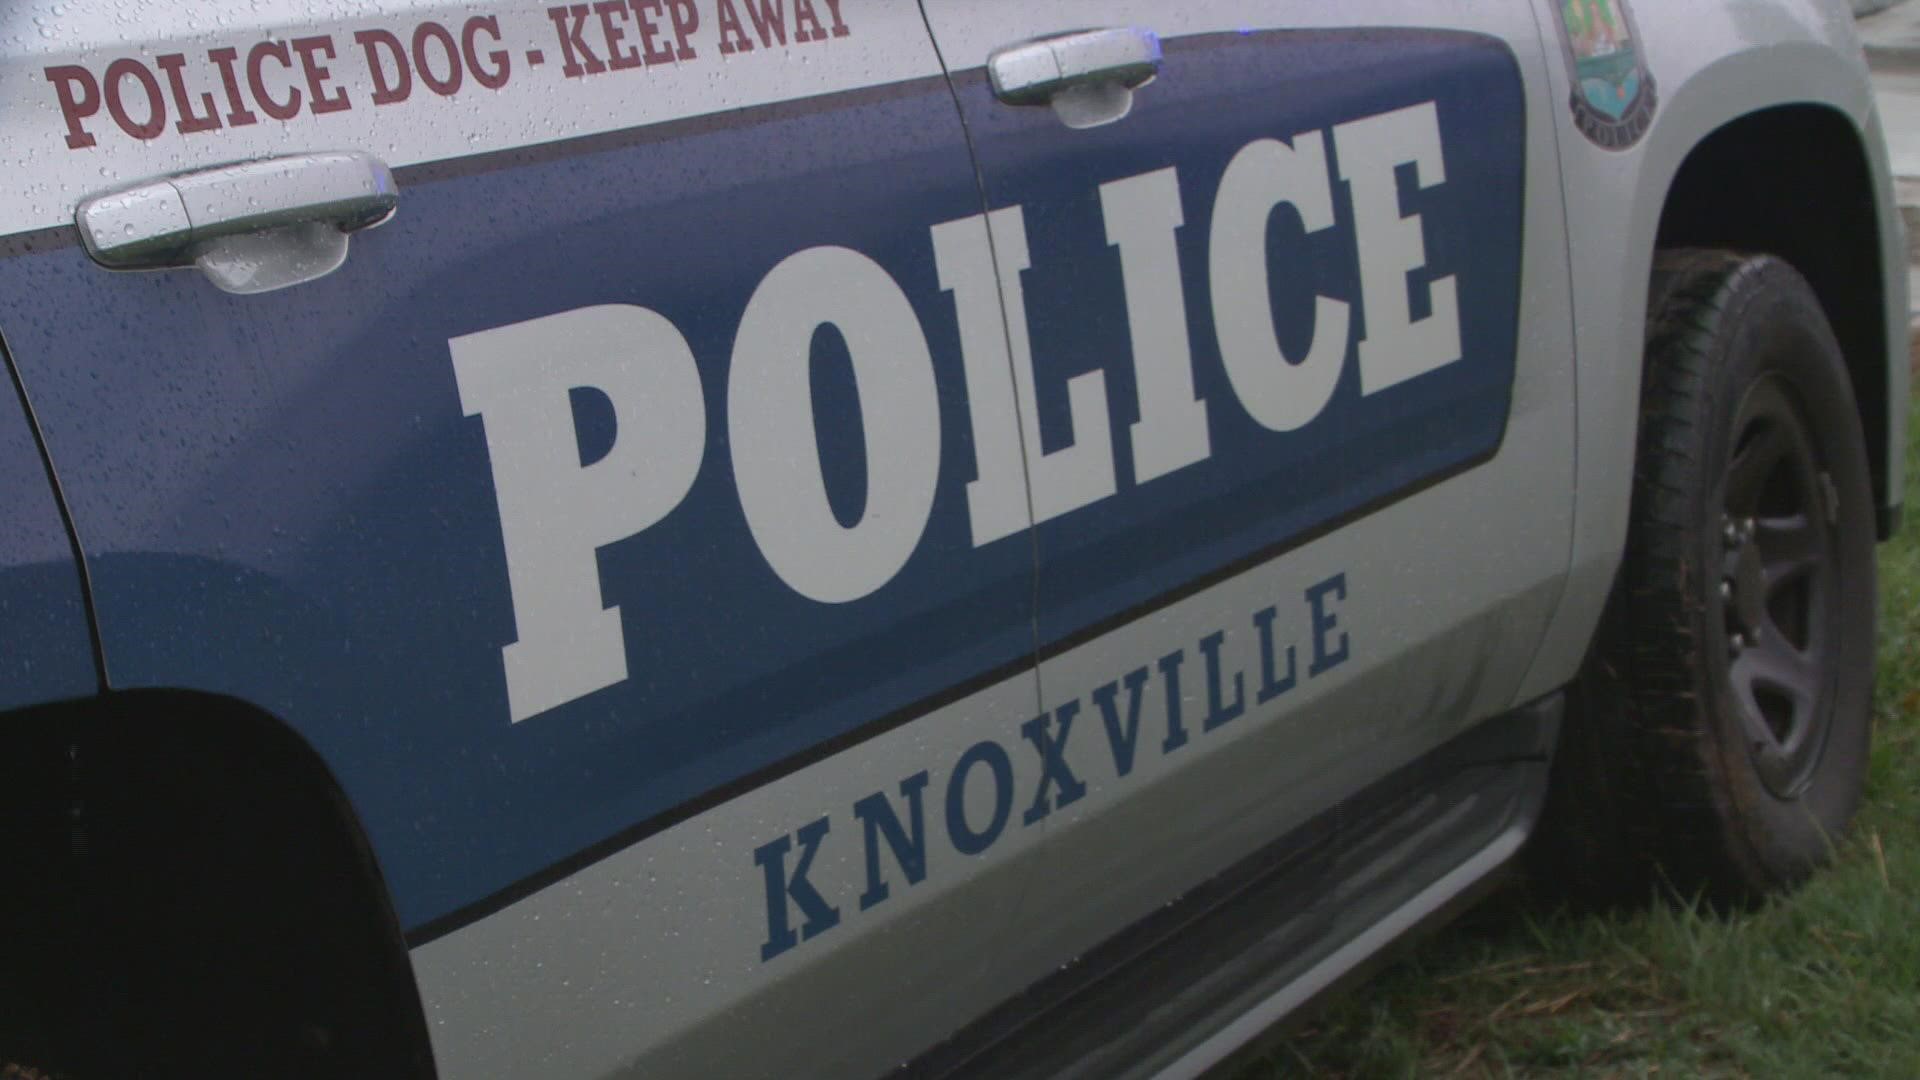 This change only impacts five area businesses where officers were previously authorized to work extra jobs, the Knoxville Police Department said.